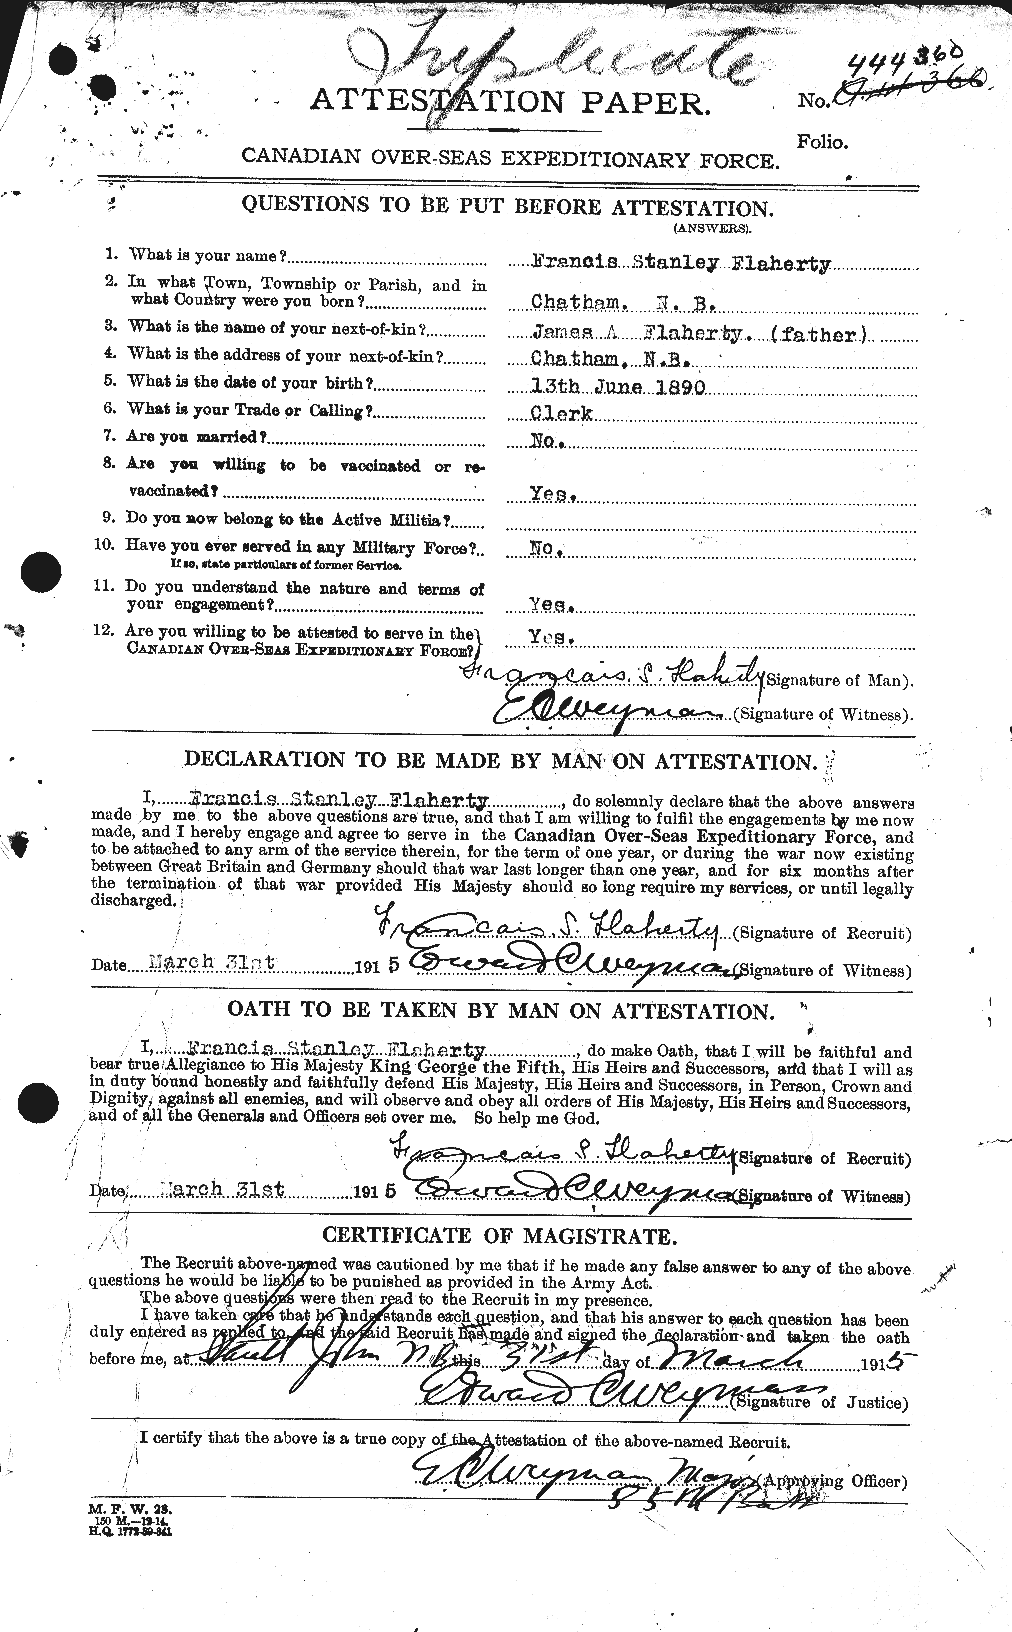 Personnel Records of the First World War - CEF 323353a